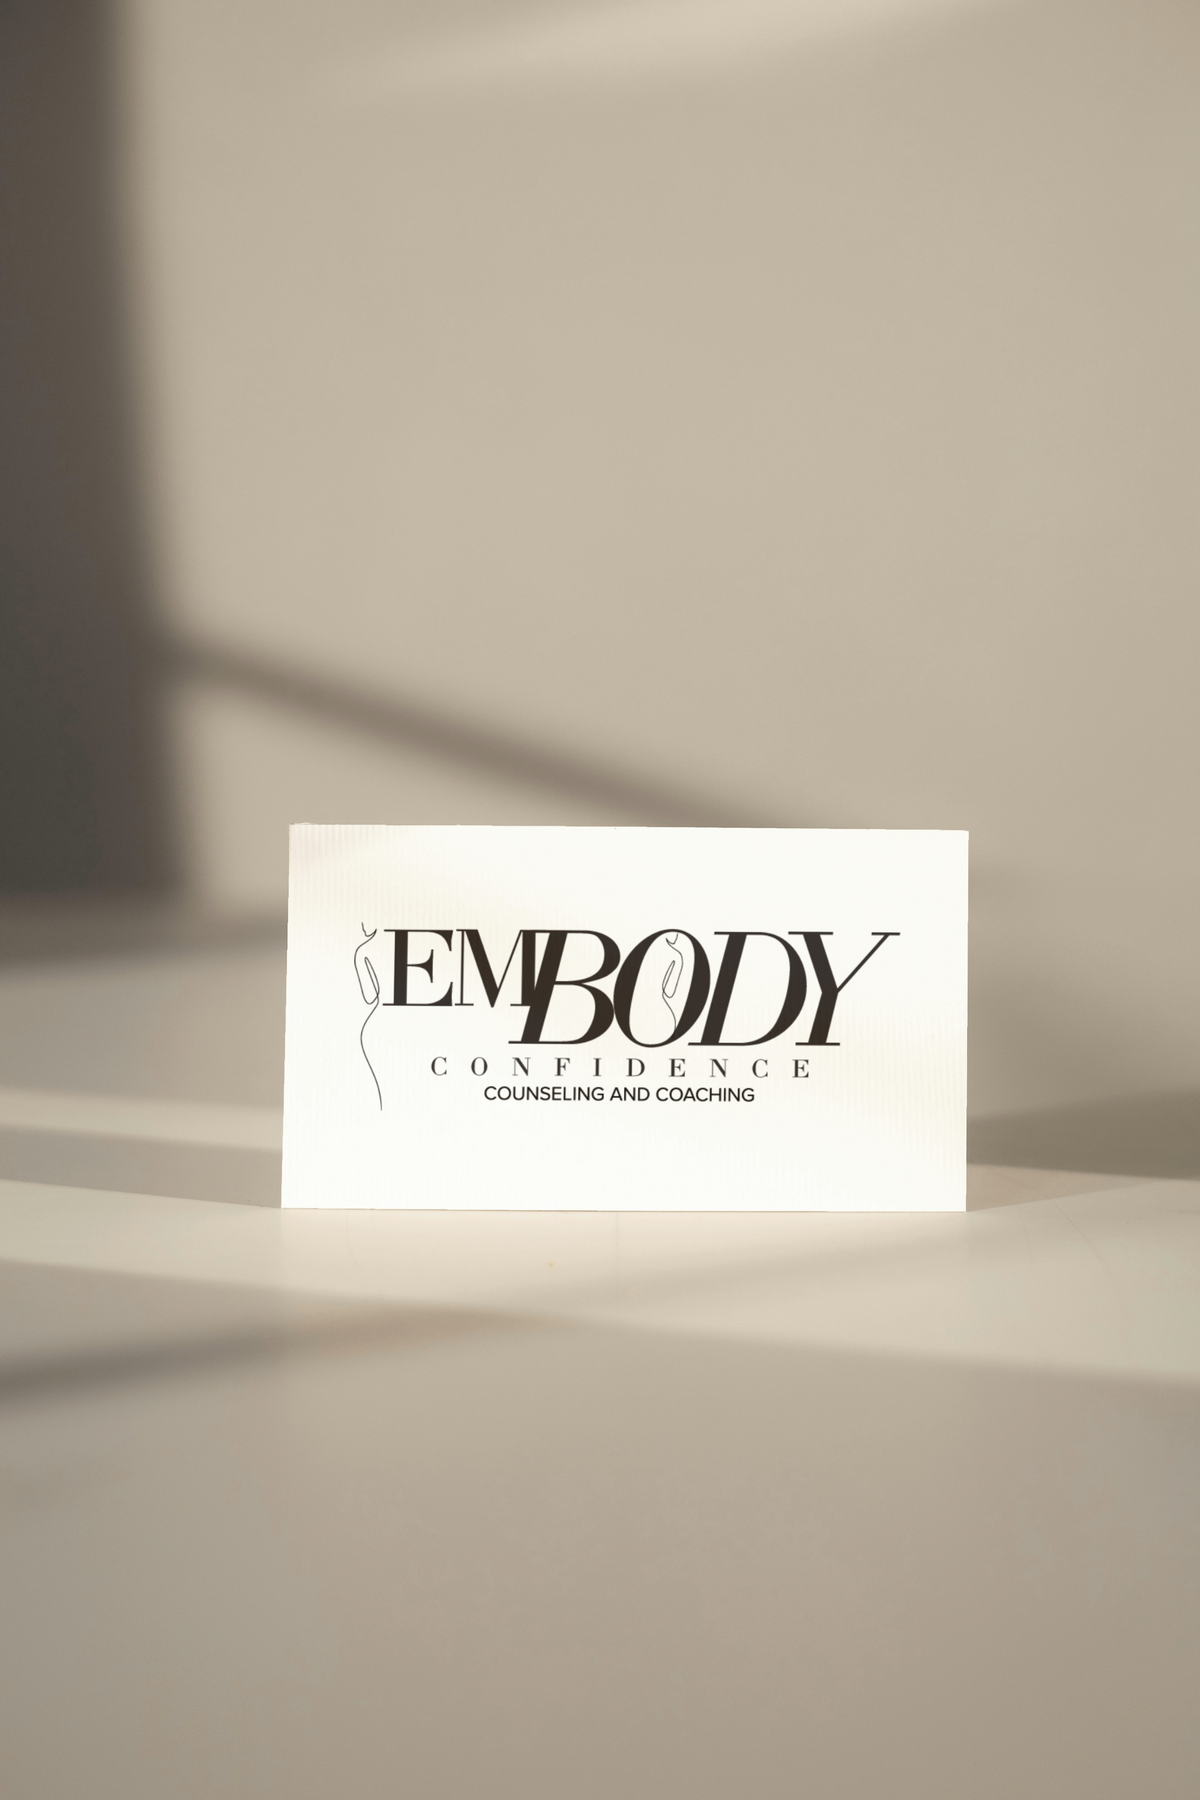 Logo Design for a Body Image Counseling Coach